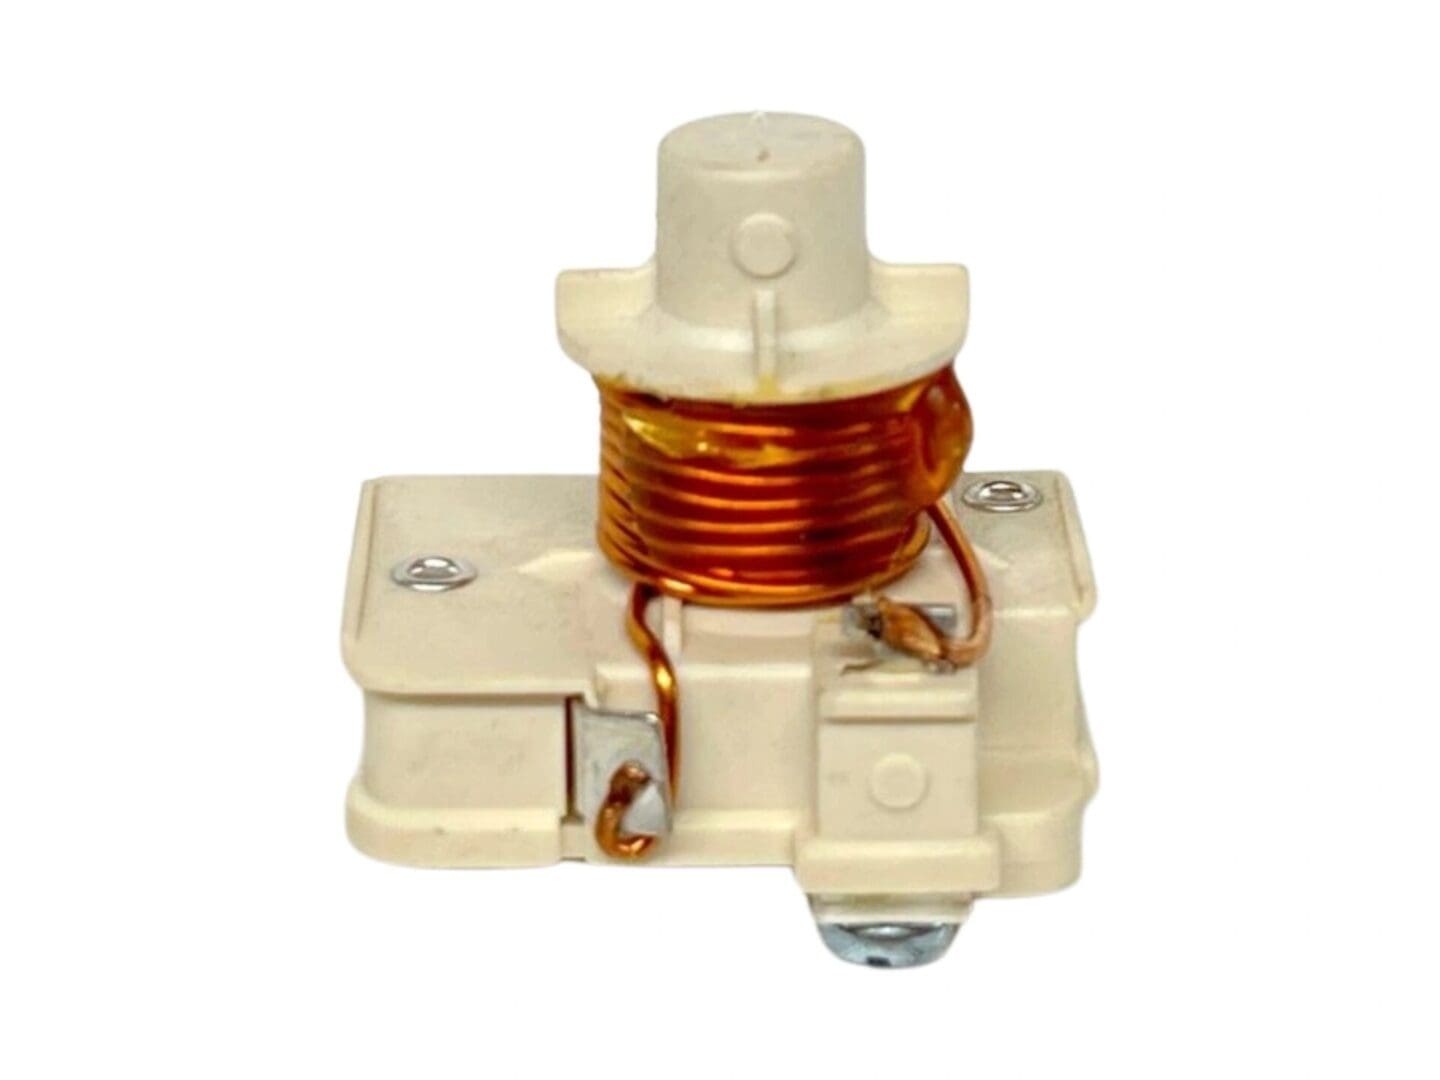 A white and orange coil is attached to the side of an electrical box.